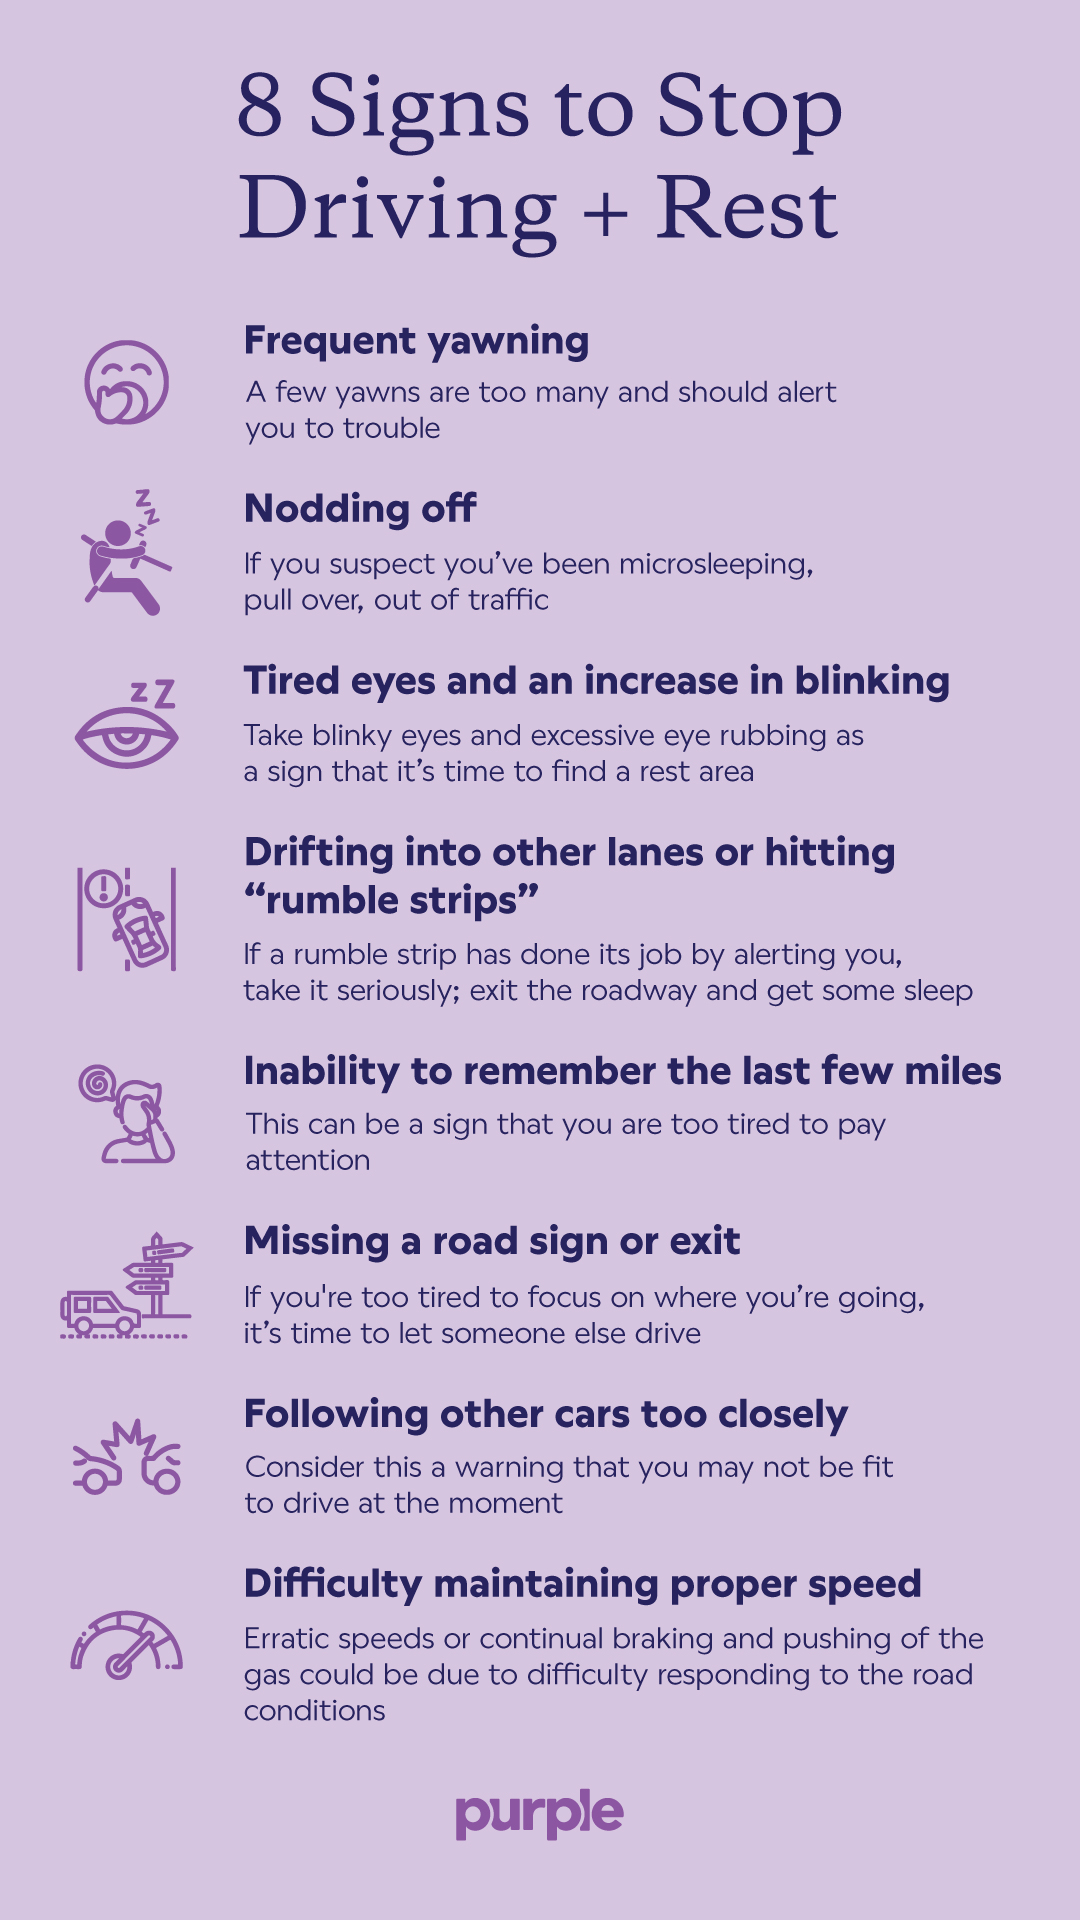 8 signs you should stop driving and rest